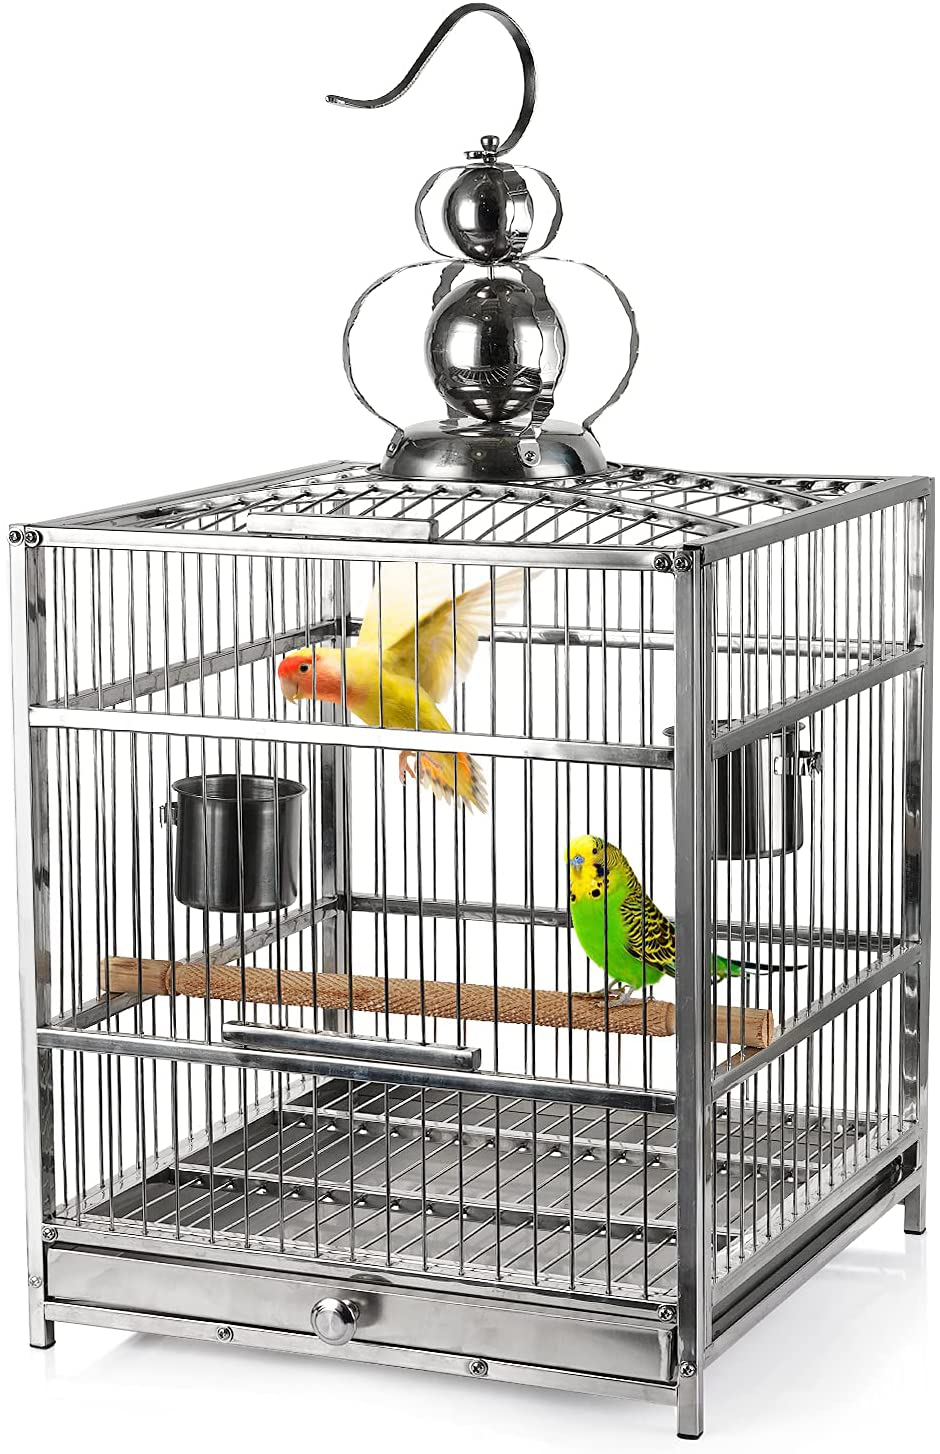 Lilithye Hanging Bird Cage Parakeet Cage Accessories Outdoor Pet Bird Travel Cages Perches with Stand for Conure Canary Parekettes Macaw Finch Cockatoo Budgie Cockatiels Animals & Pet Supplies > Pet Supplies > Bird Supplies > Bird Cage Accessories Lilithye   